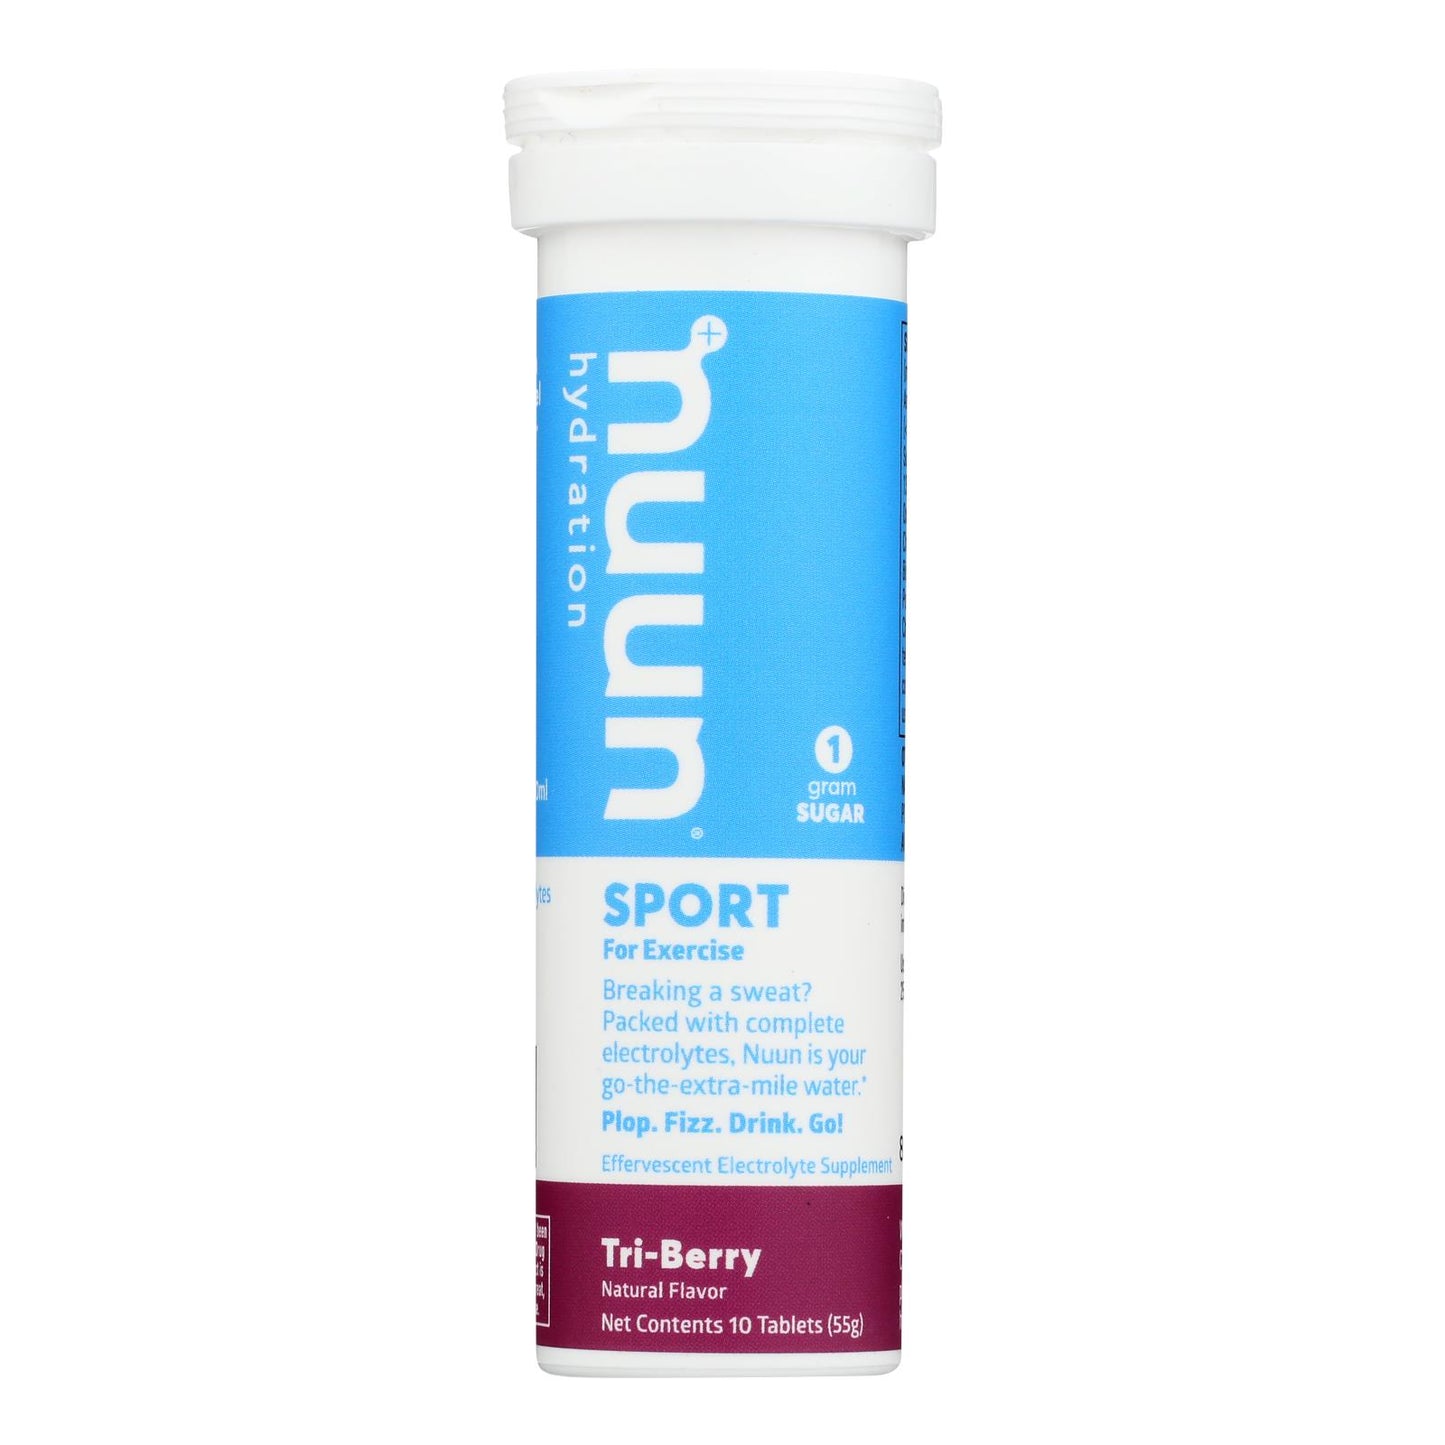 Nuun Hydration Electrolyte Tablets, Tri-Berry, 10 tablets each, Case Of 8